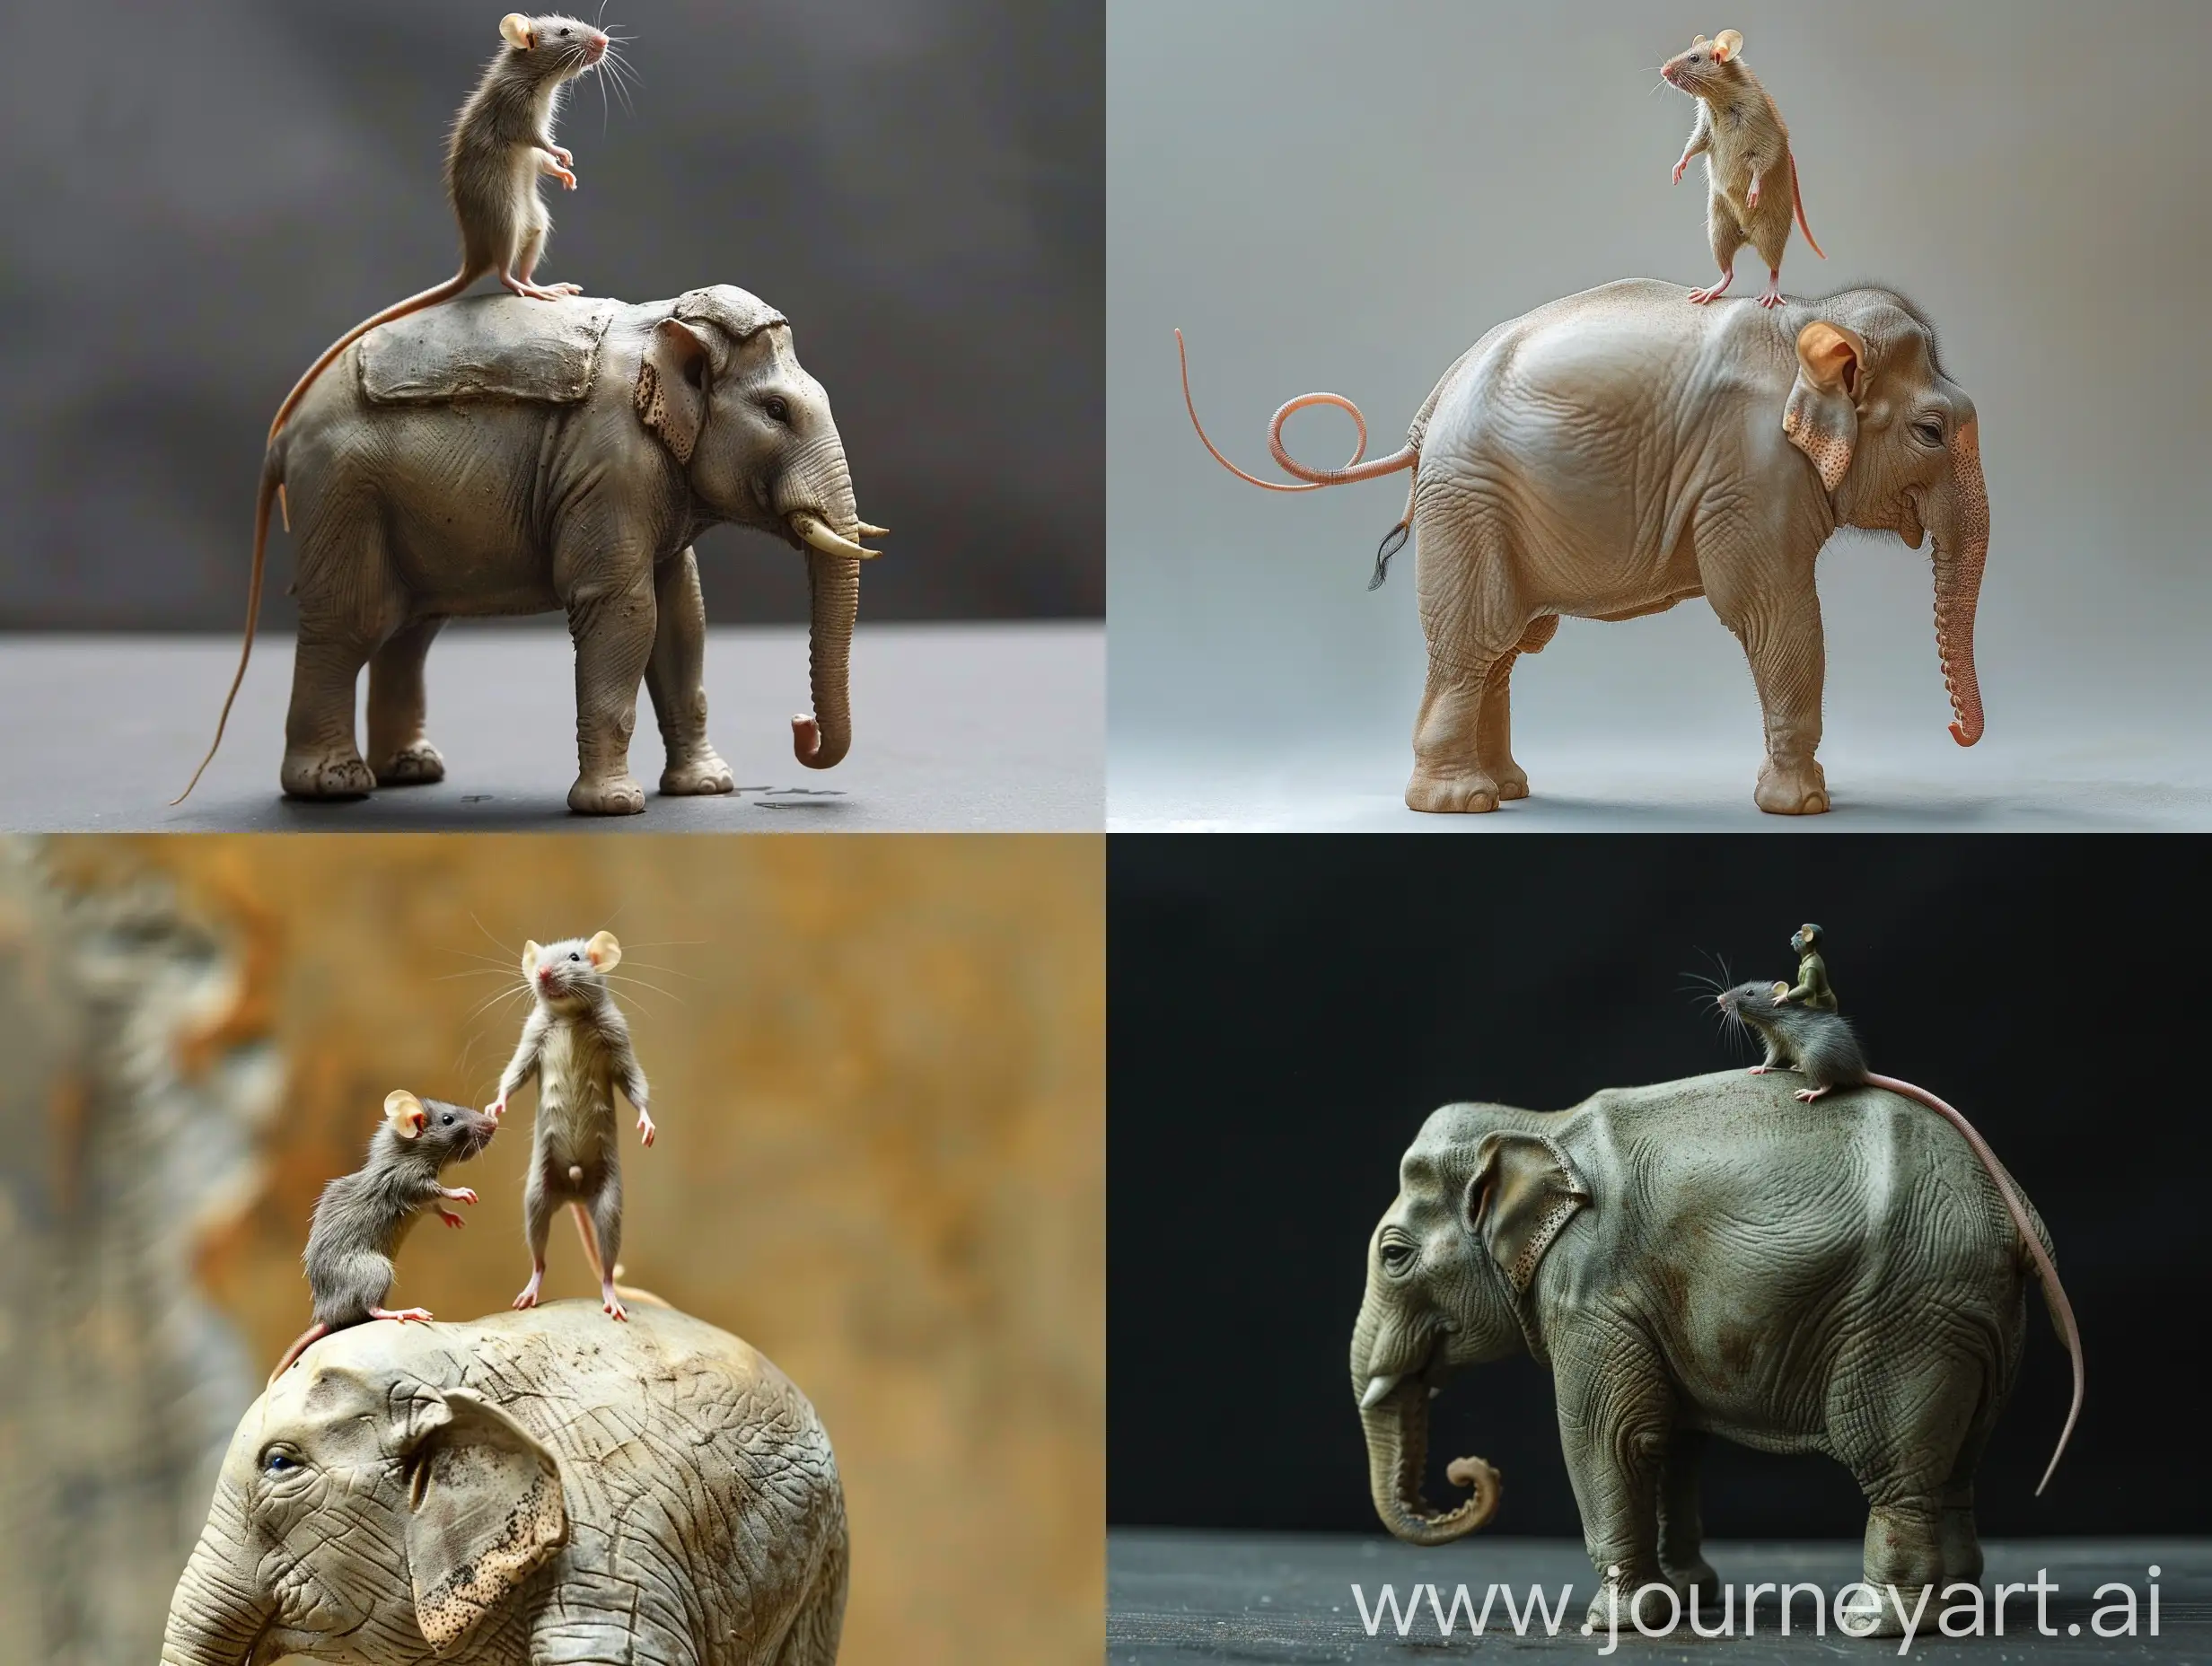 make realistic image of a rat man standing on elephant

